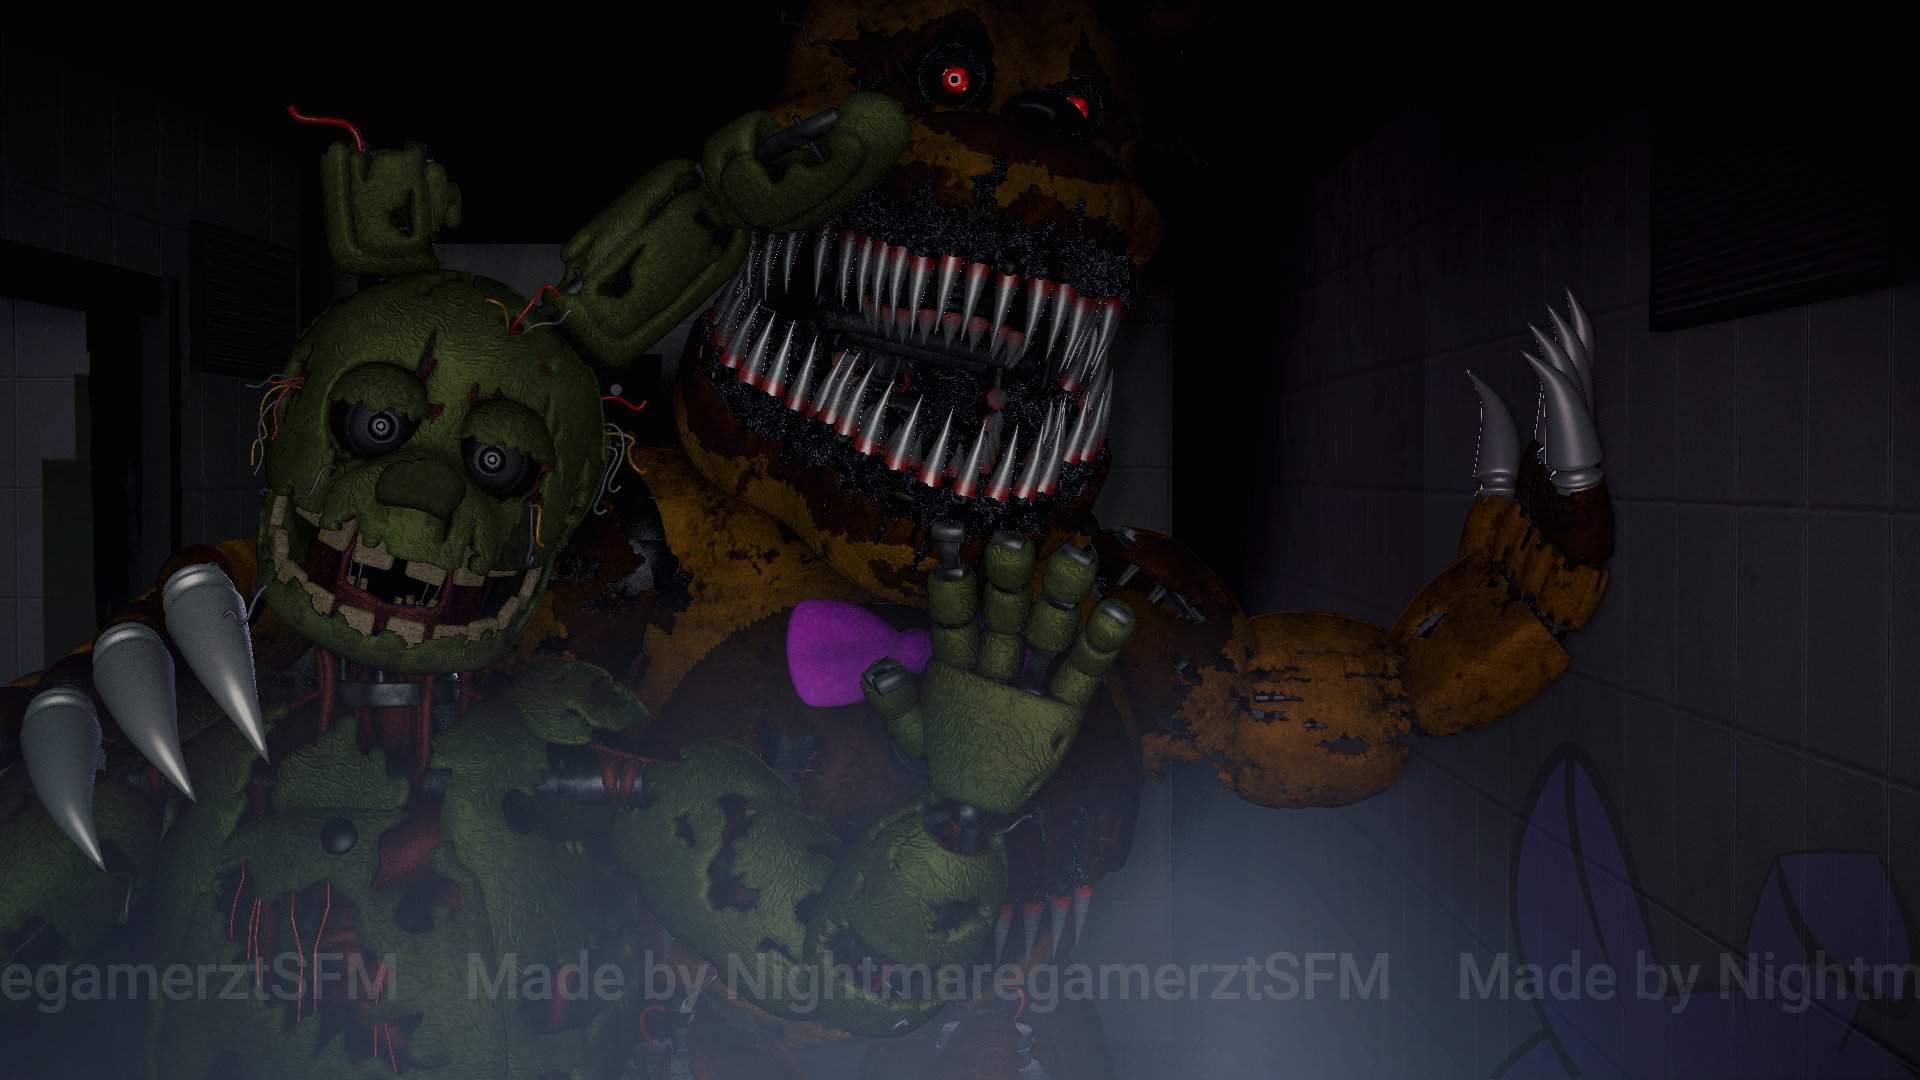 Spring trap and nightmare fredbear gift. Five Nights At Freddy's